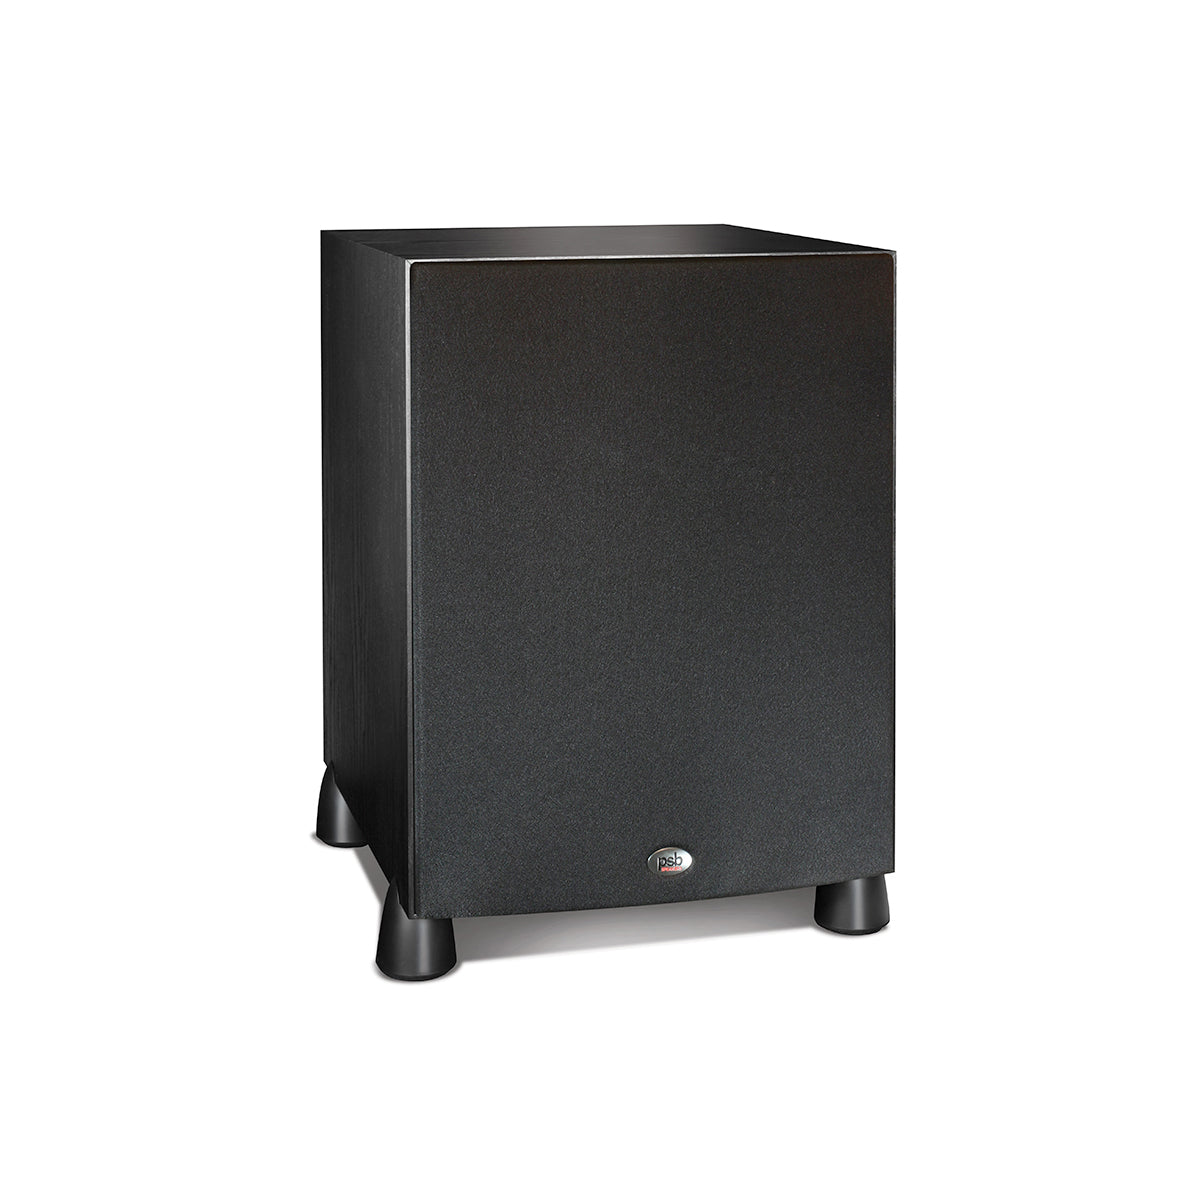 PSB SubSeries 200 Active Subwoofer - The Audio Experts